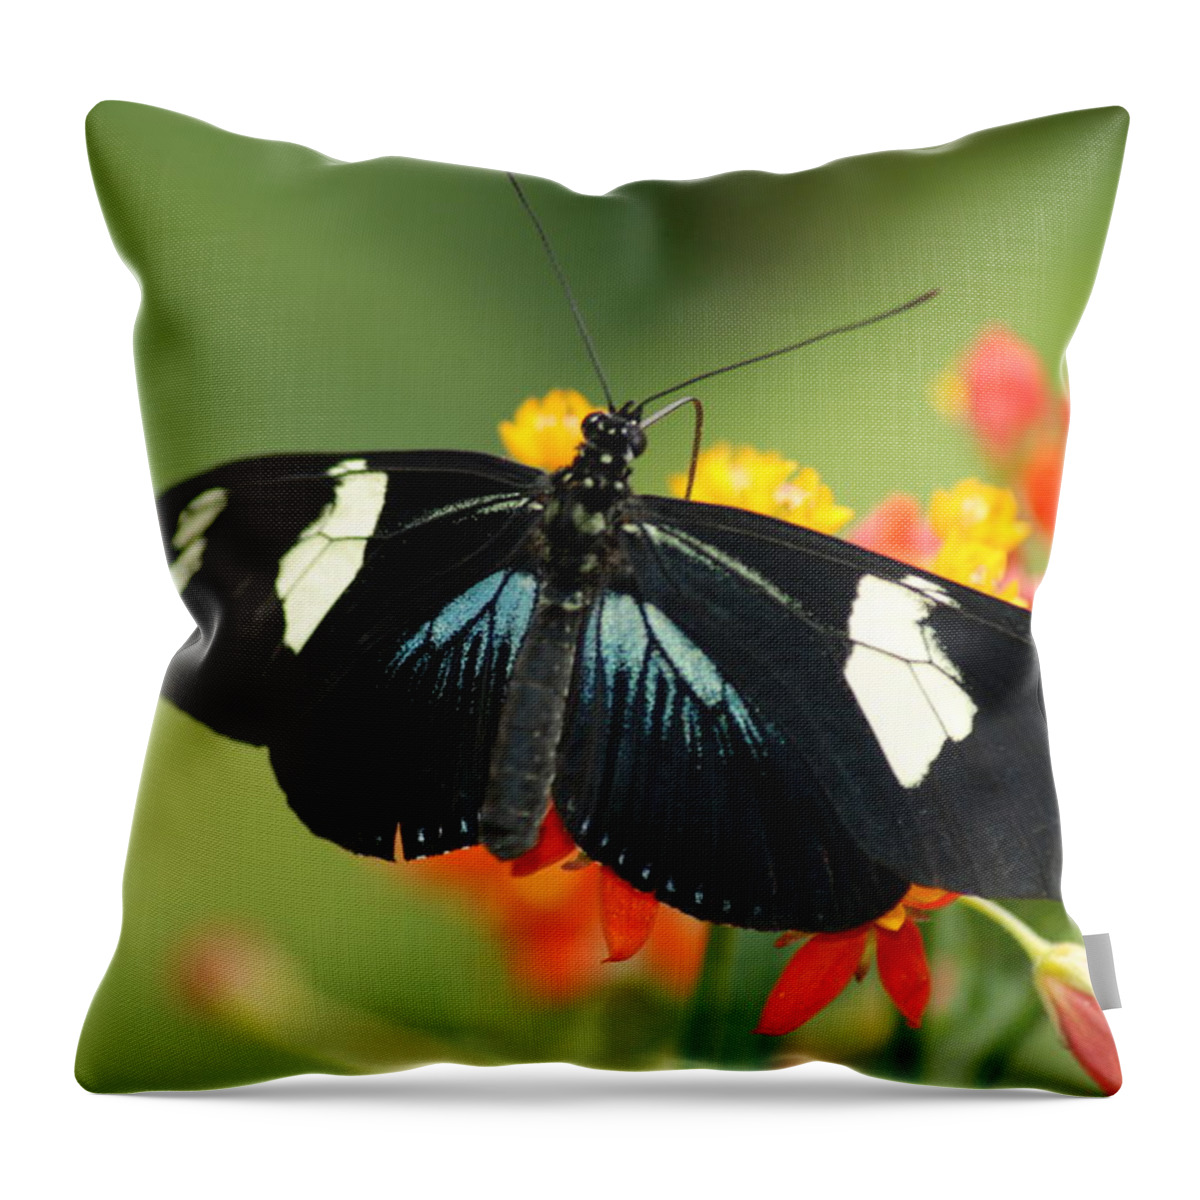 Doris Throw Pillow featuring the photograph Doris Butterfly by Richard Bryce and Family